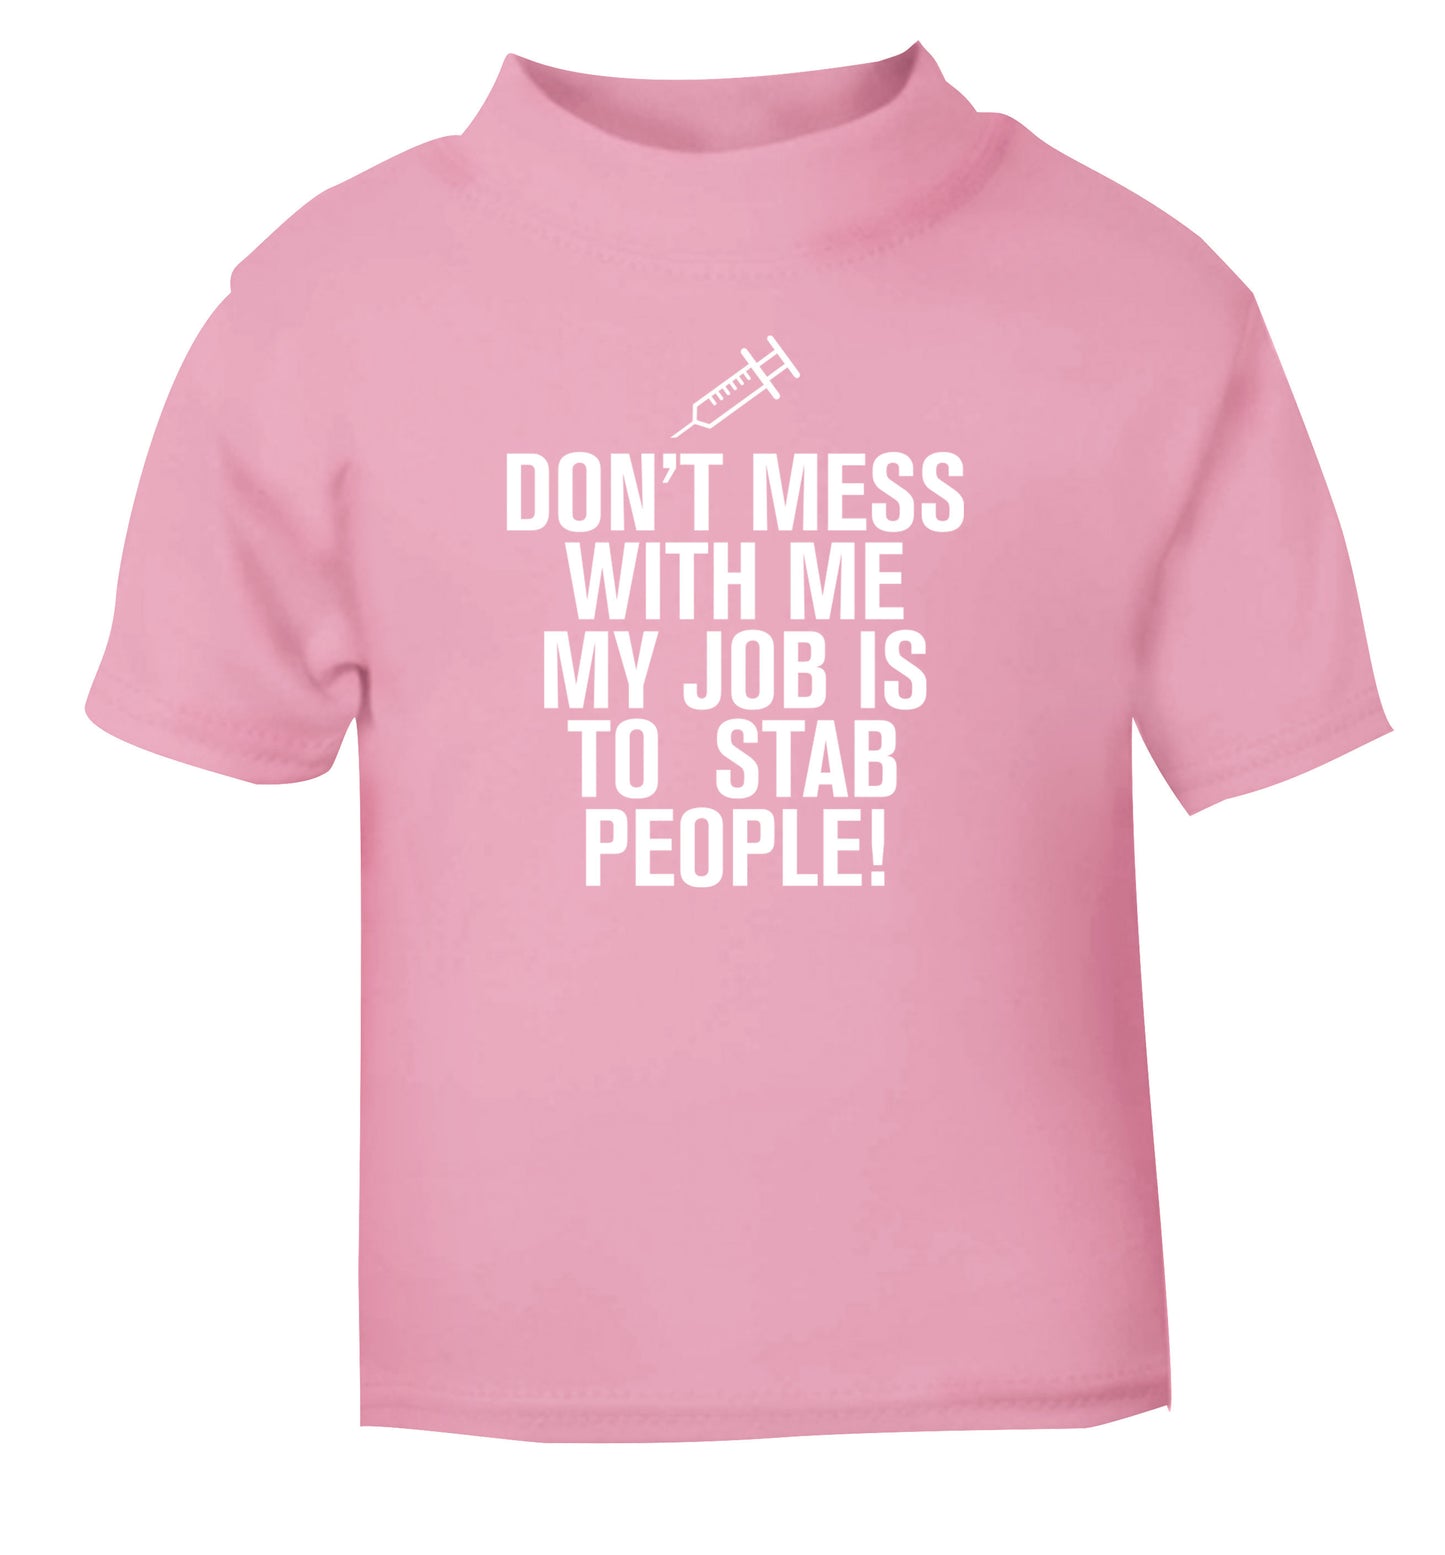 Don't mess with me my job is to stab people! light pink Baby Toddler Tshirt 2 Years